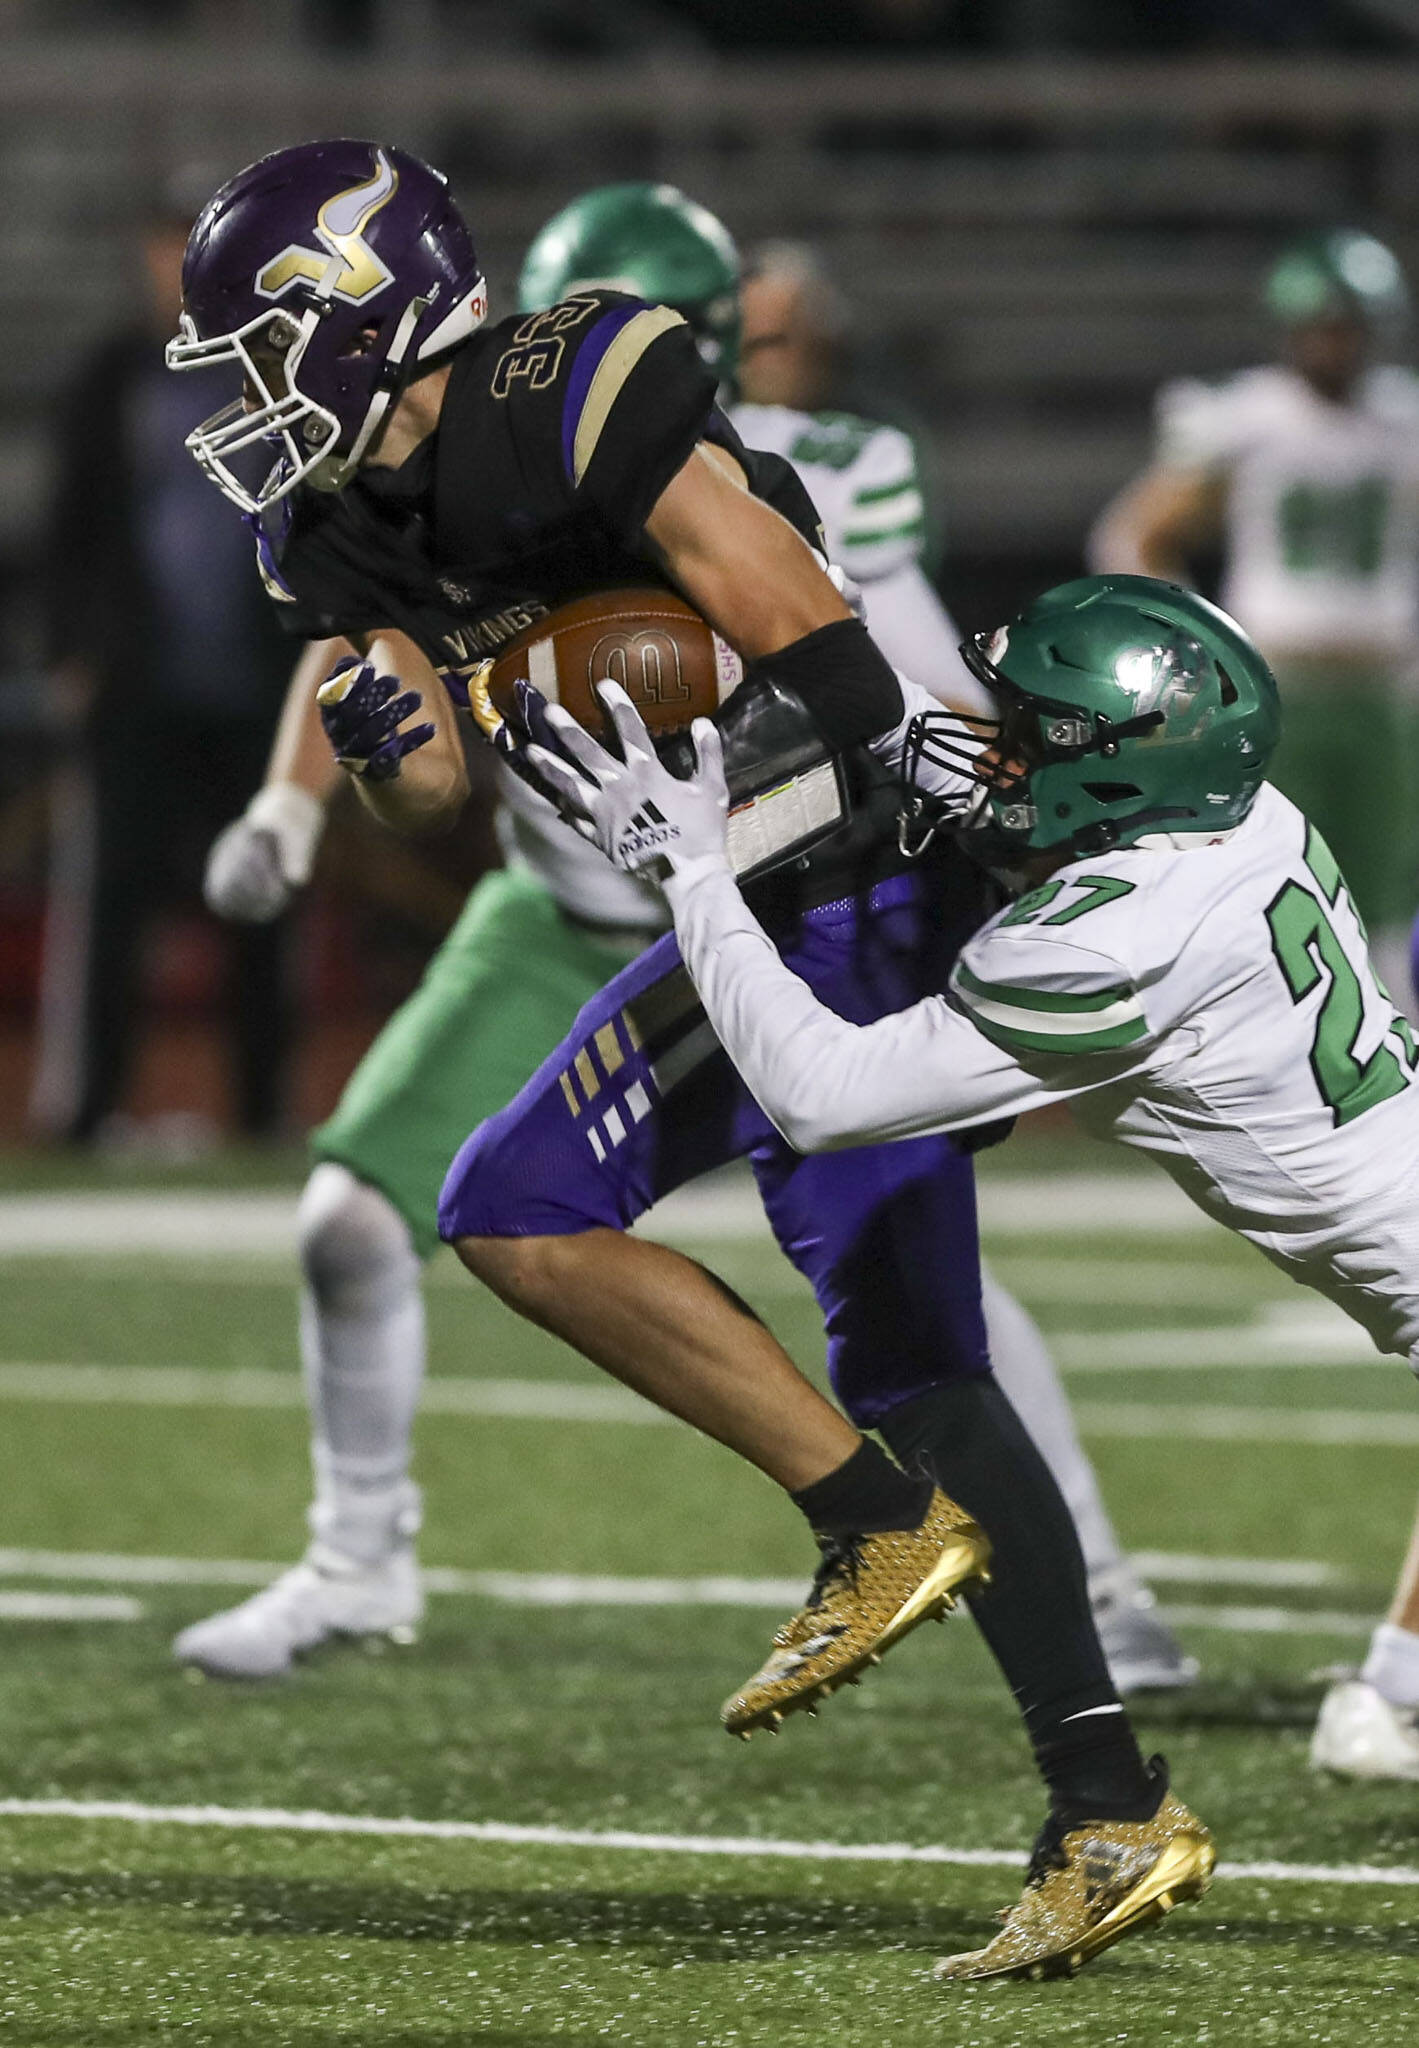 Lake Stevens’ David Brown (33) runs with the ball during a football against West Linn on Sept. 22 at Lake Stevens High School. (Annie Barker / The Herald)